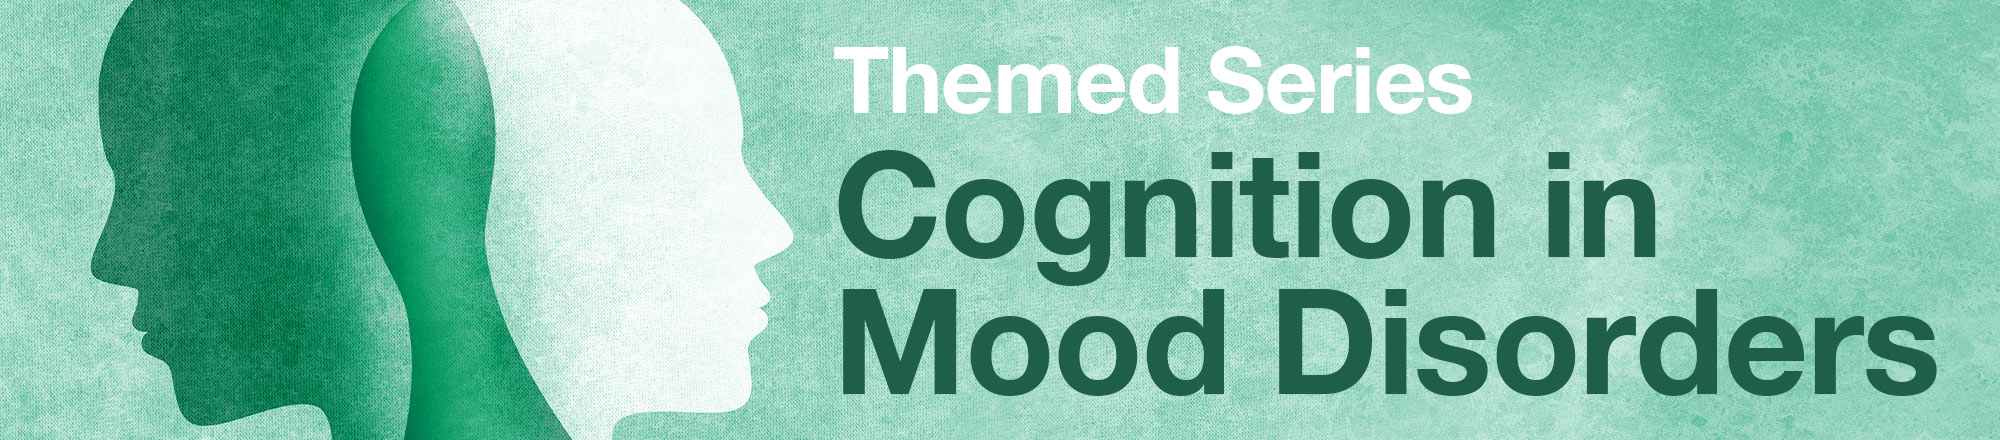 Cognition in Mood Disorders